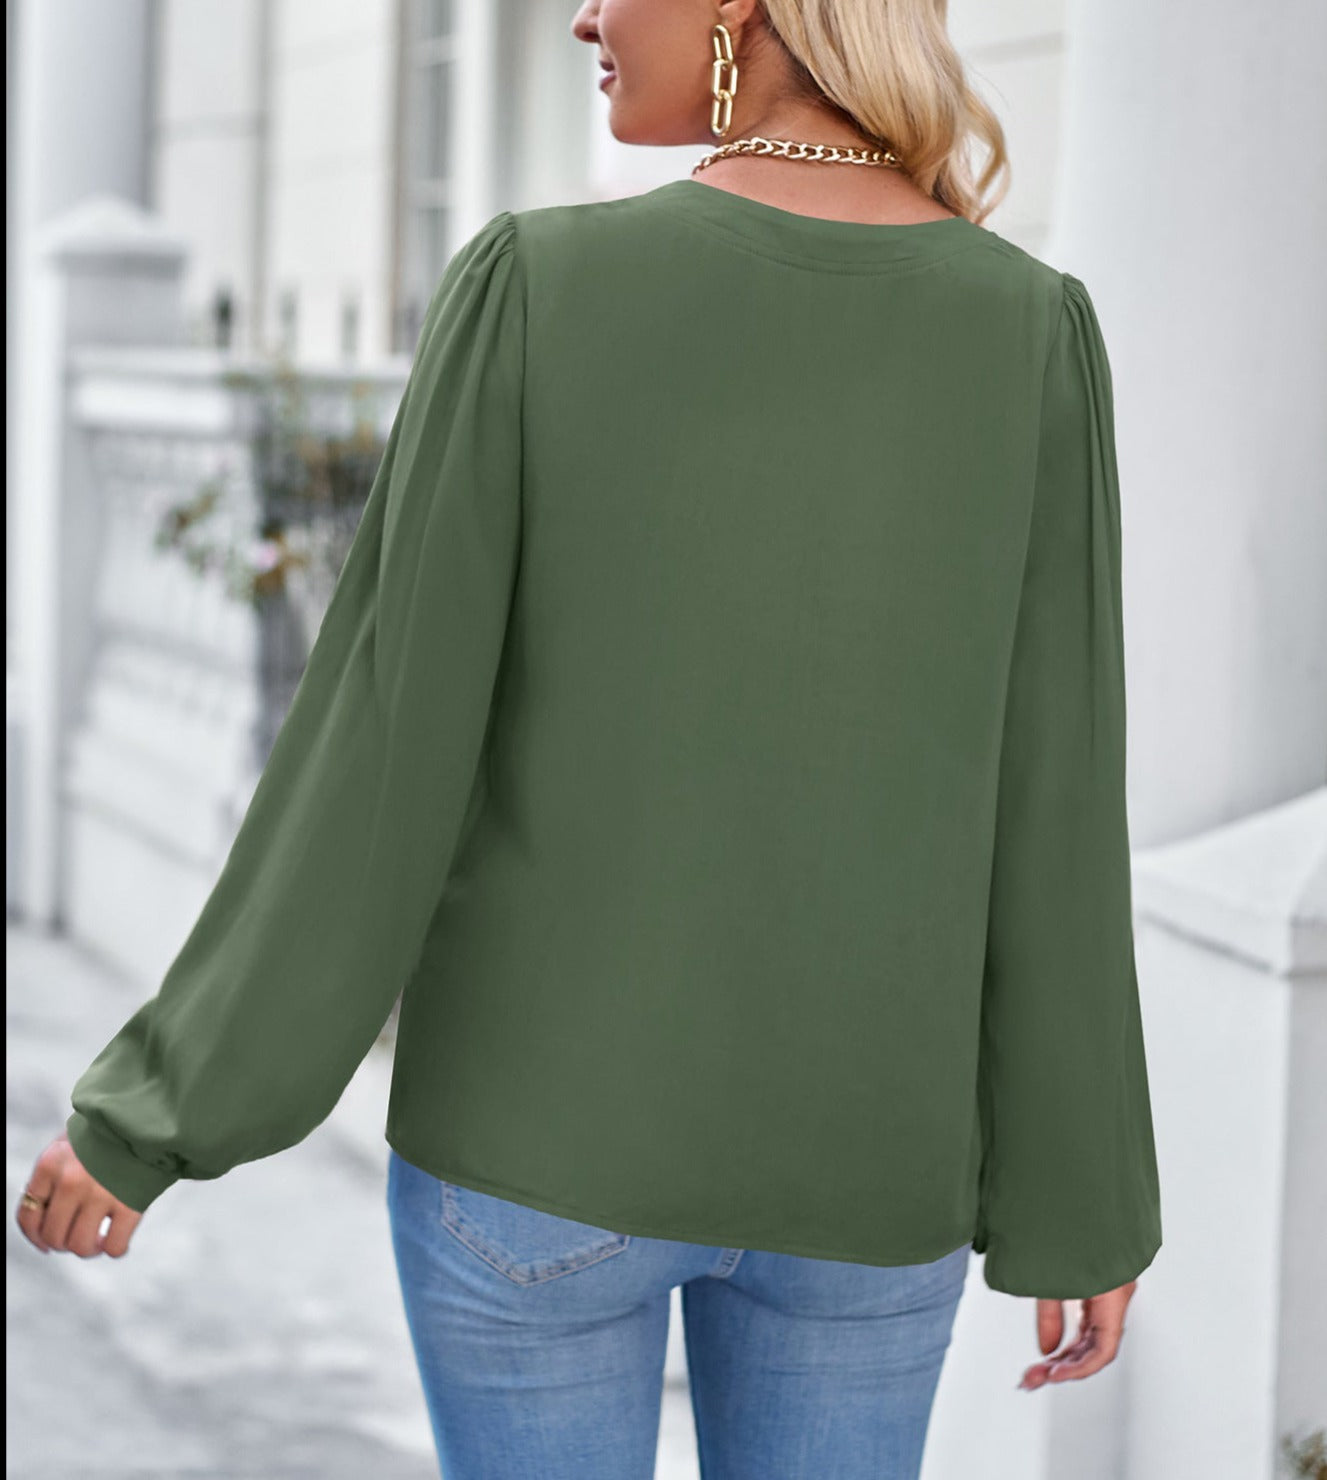 Slim-Fit Long-Sleeve Shirt with a V-neck in Leisure Style and a Solid Color